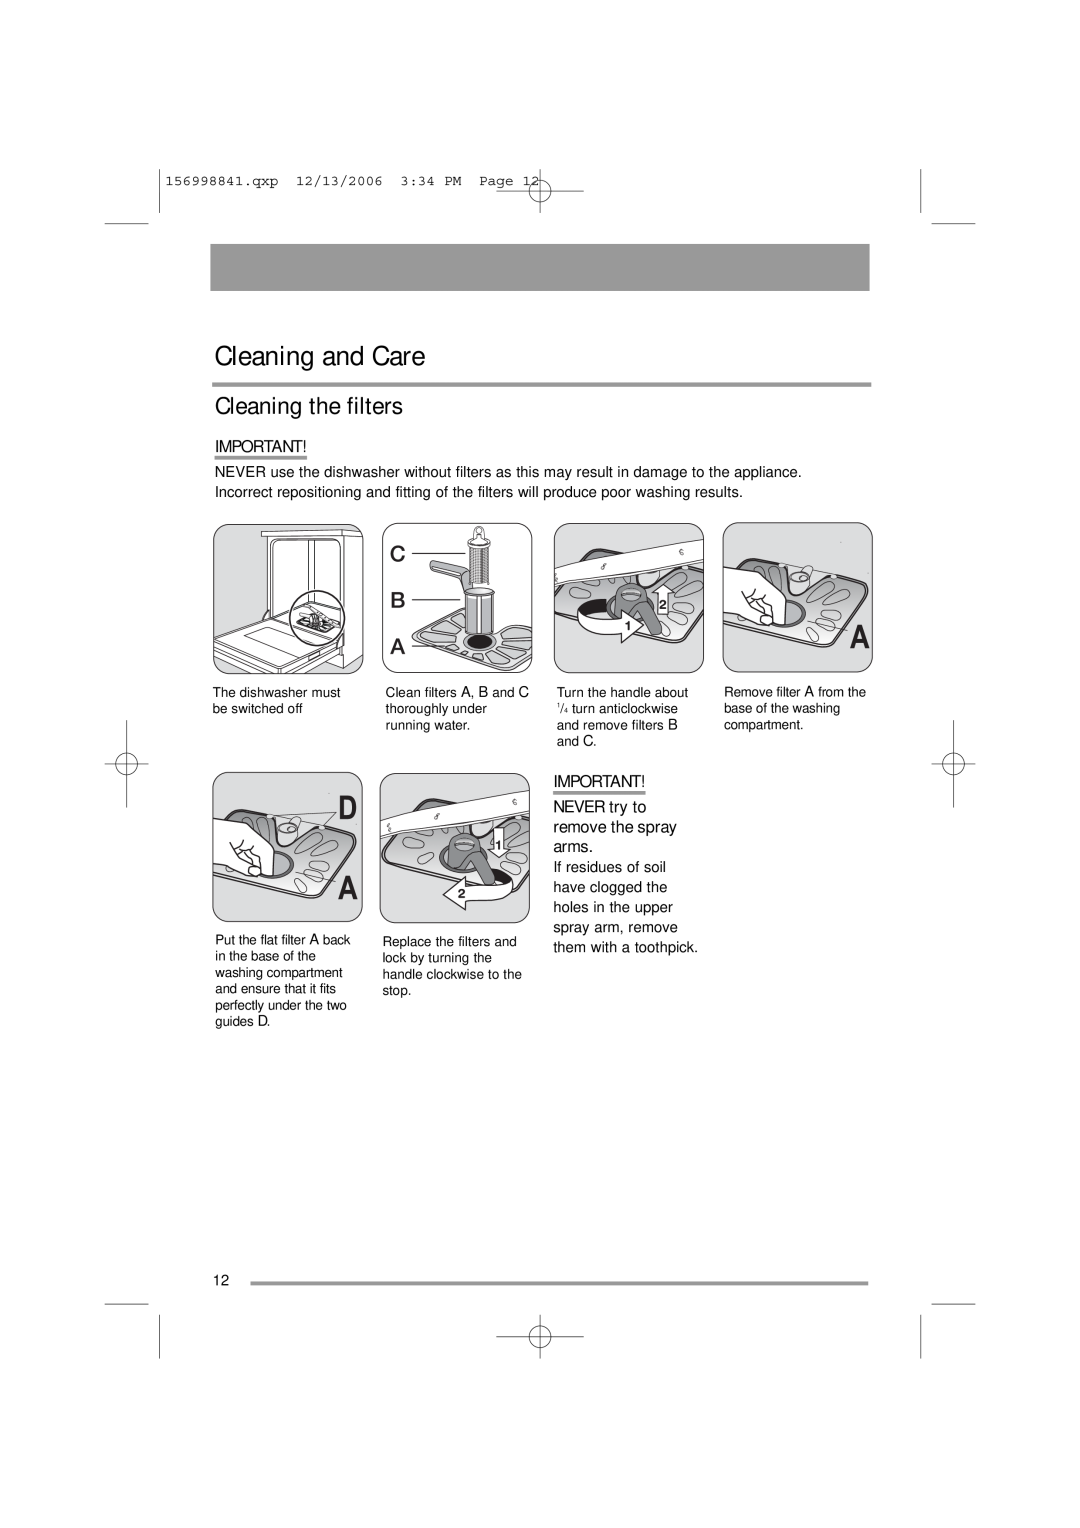 Simpson 52C850 user manual Cleaning and Care, Cleaning the filters, NEVER try to remove the spray arms 